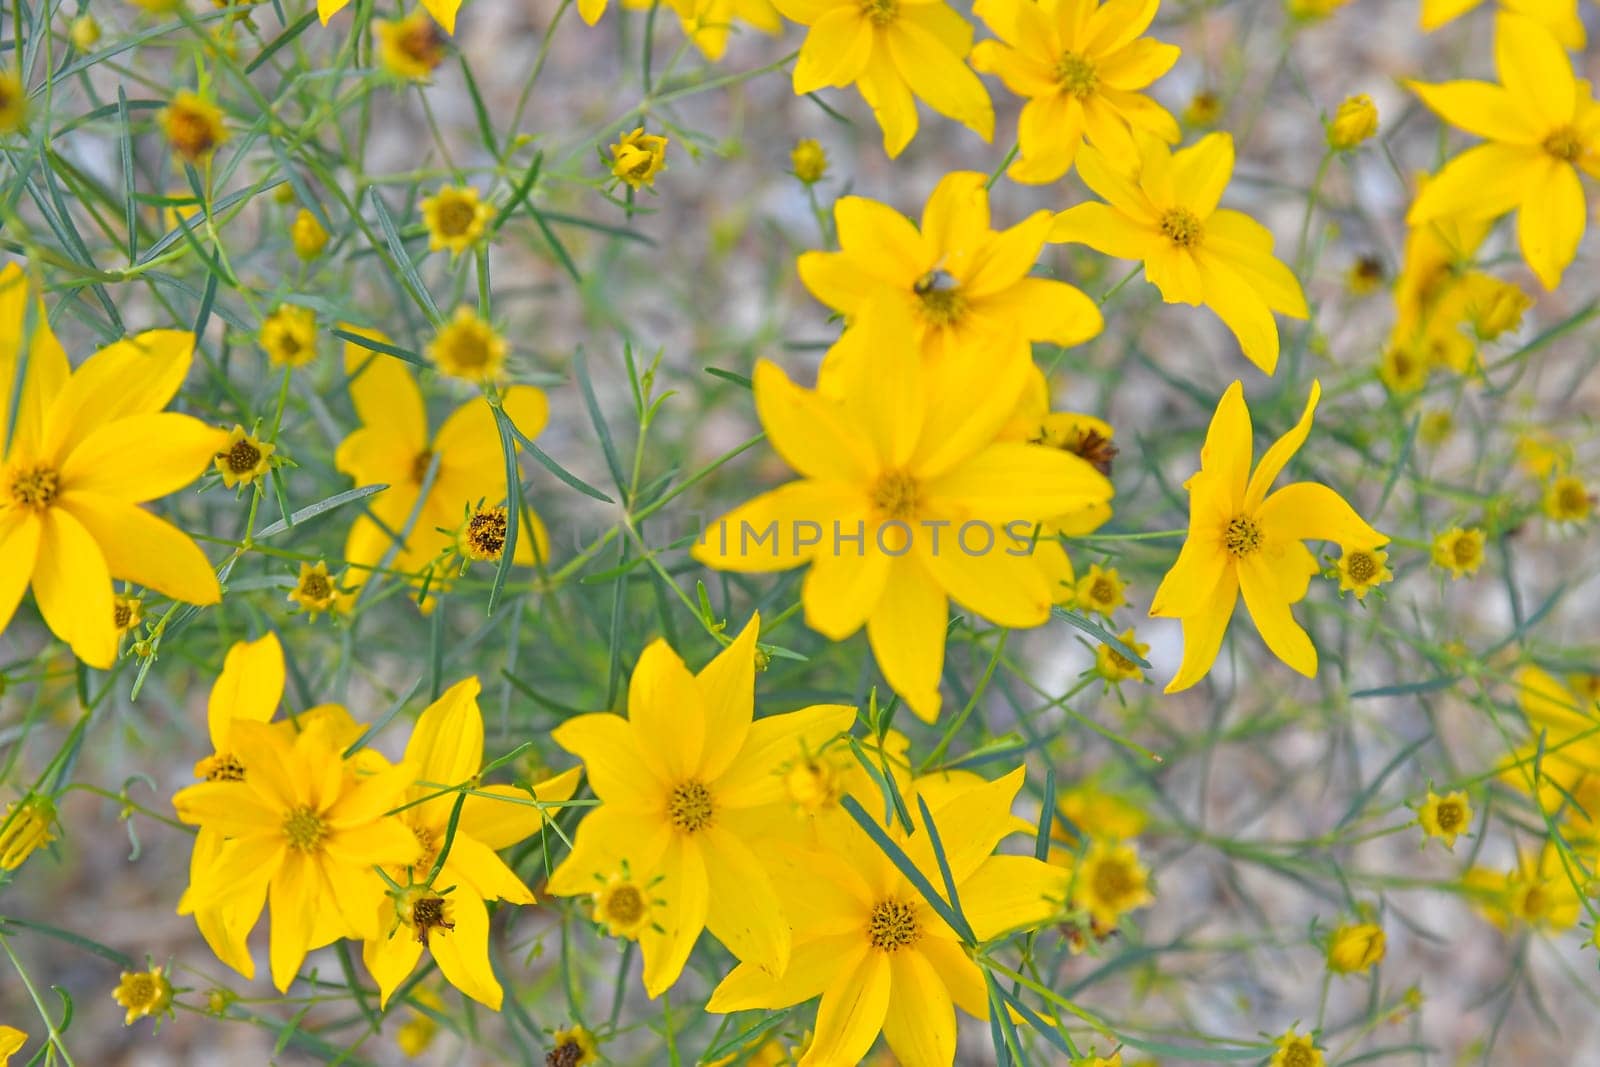 Coreopsis is a genus of flowering plants in the family Asteraceae. Common names include calliopsis and tickseed by roman_nerud